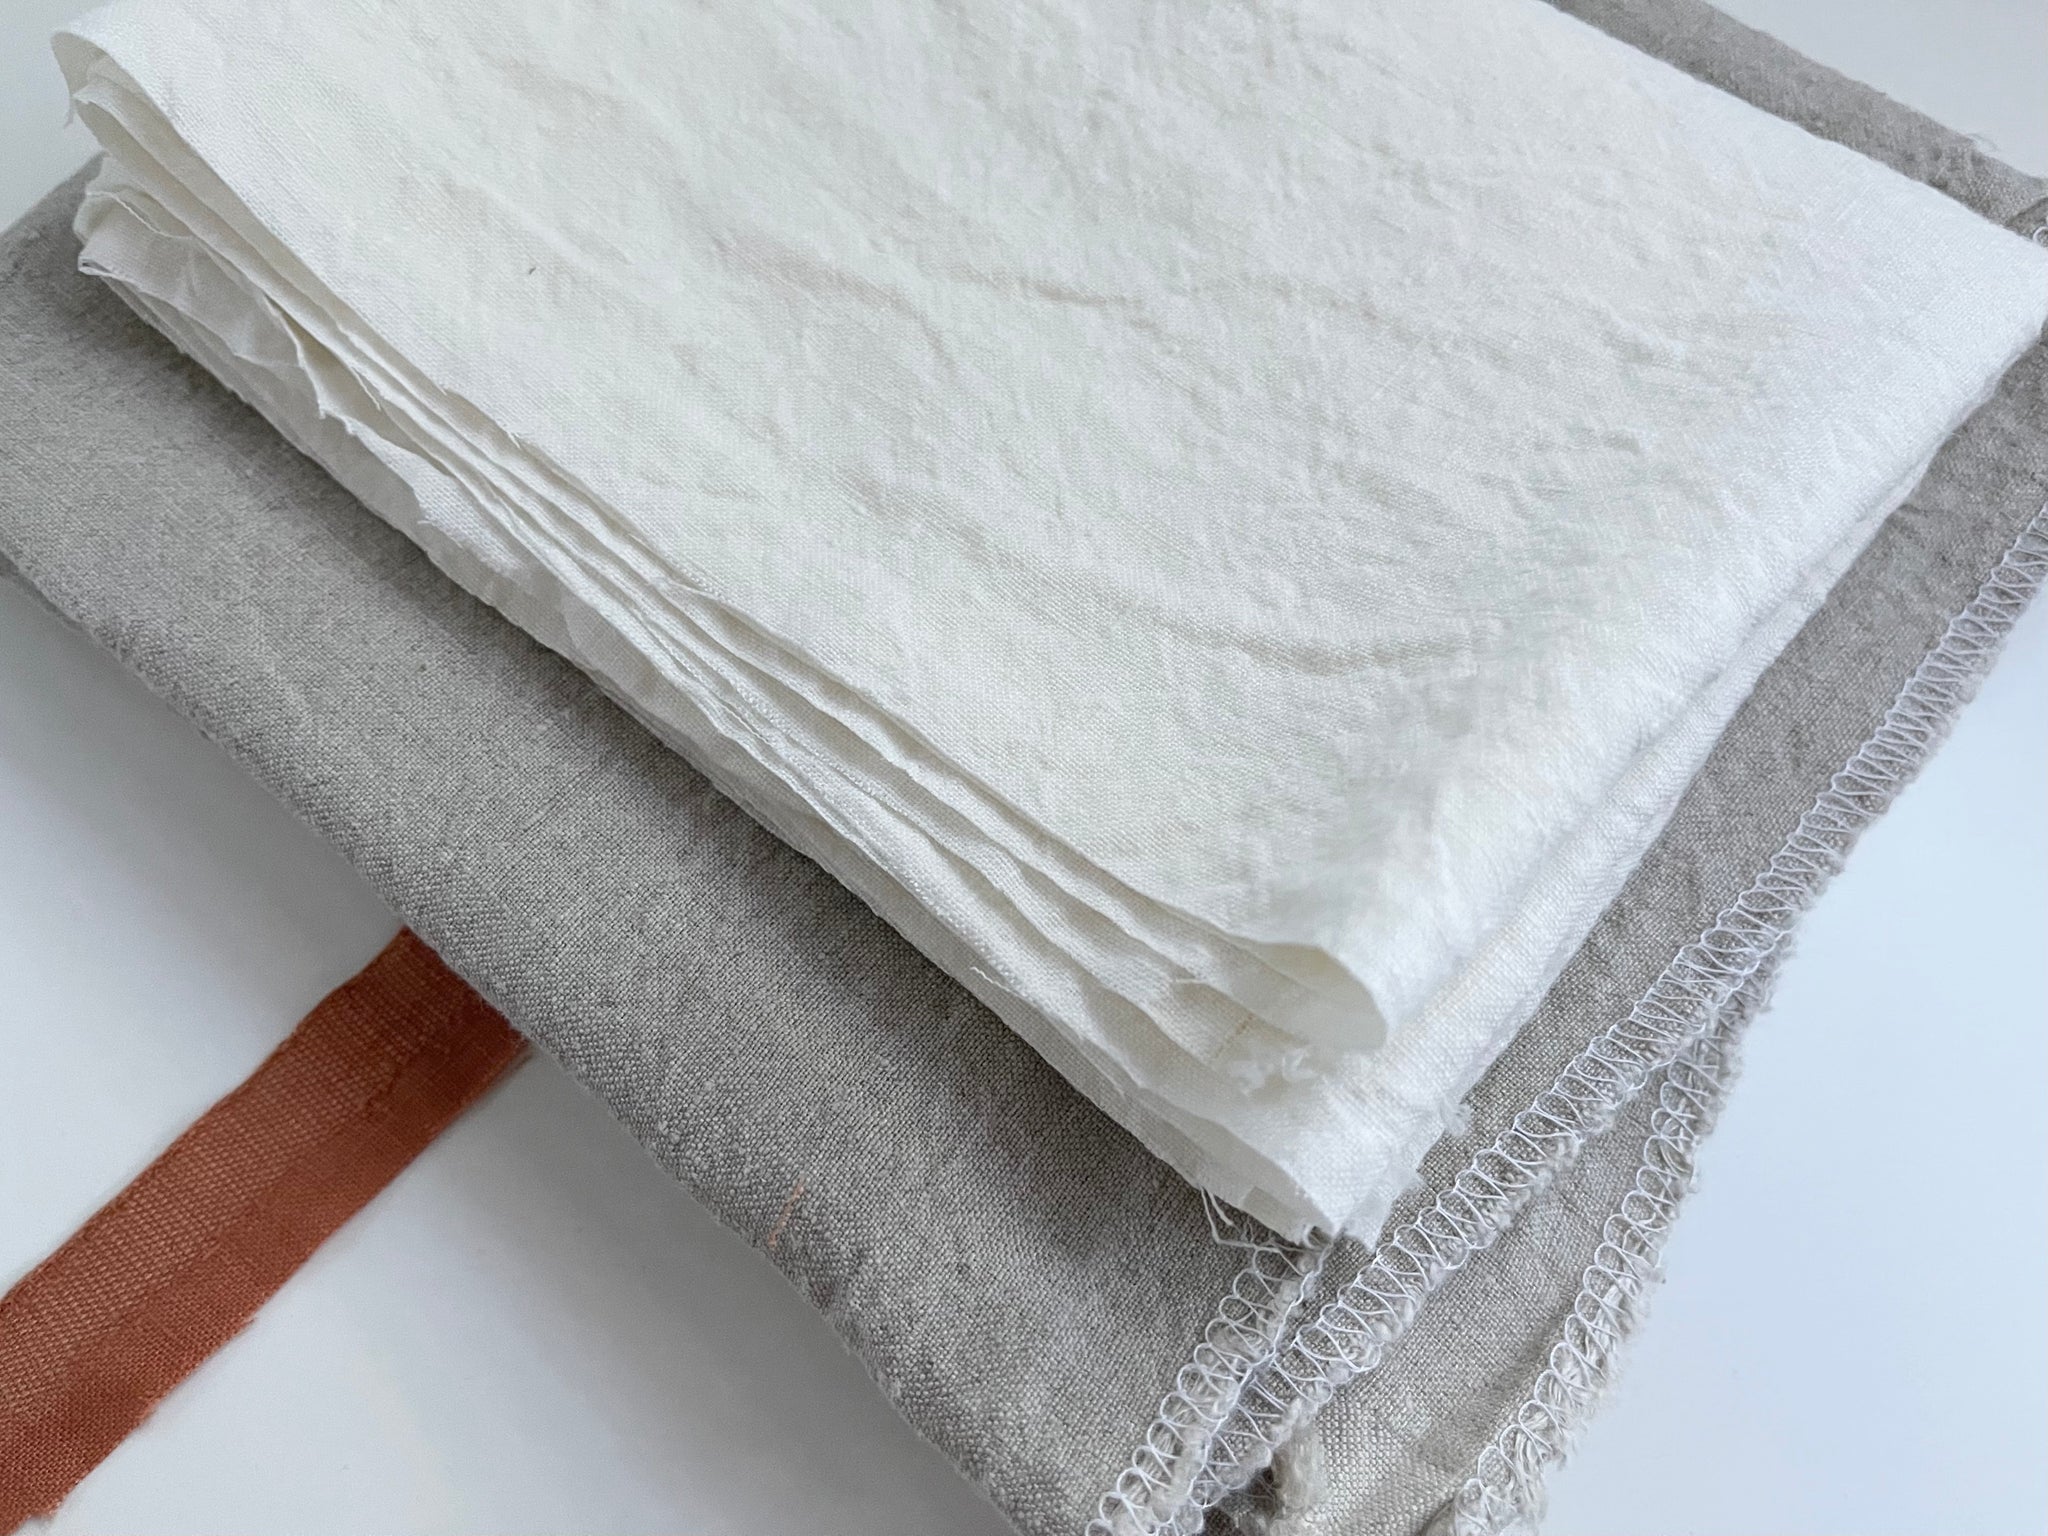 Linen Fabric Remnants - Ivory, Natural